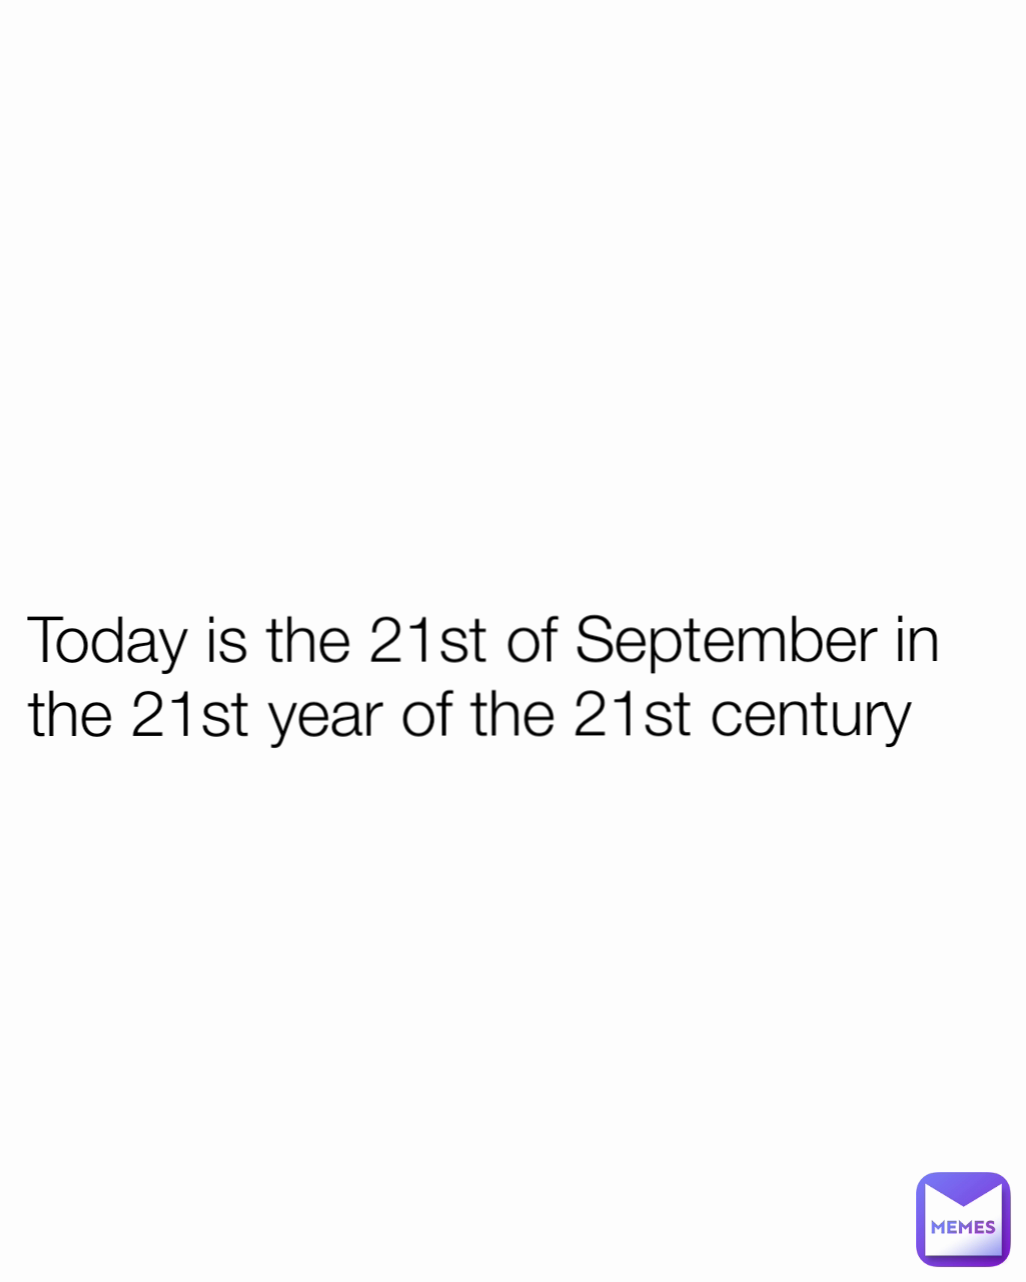 Today is the 21st of September in the 21st year of the 21st century